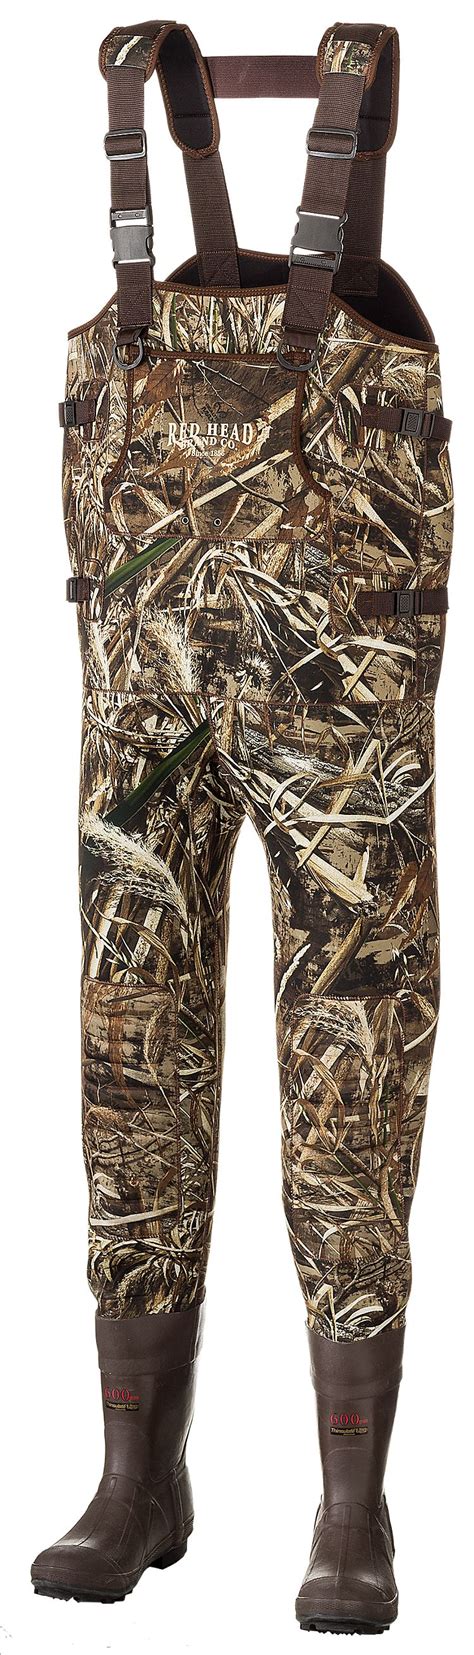 Redhead waders. This product is currently not available online. Buy the RedHead Bone-Dry Waterproof Hobbs Creek Chest Waders for Kids or Men and more quality Fishing, Hunting and Outdoor gear at Bass Pro Shops. 